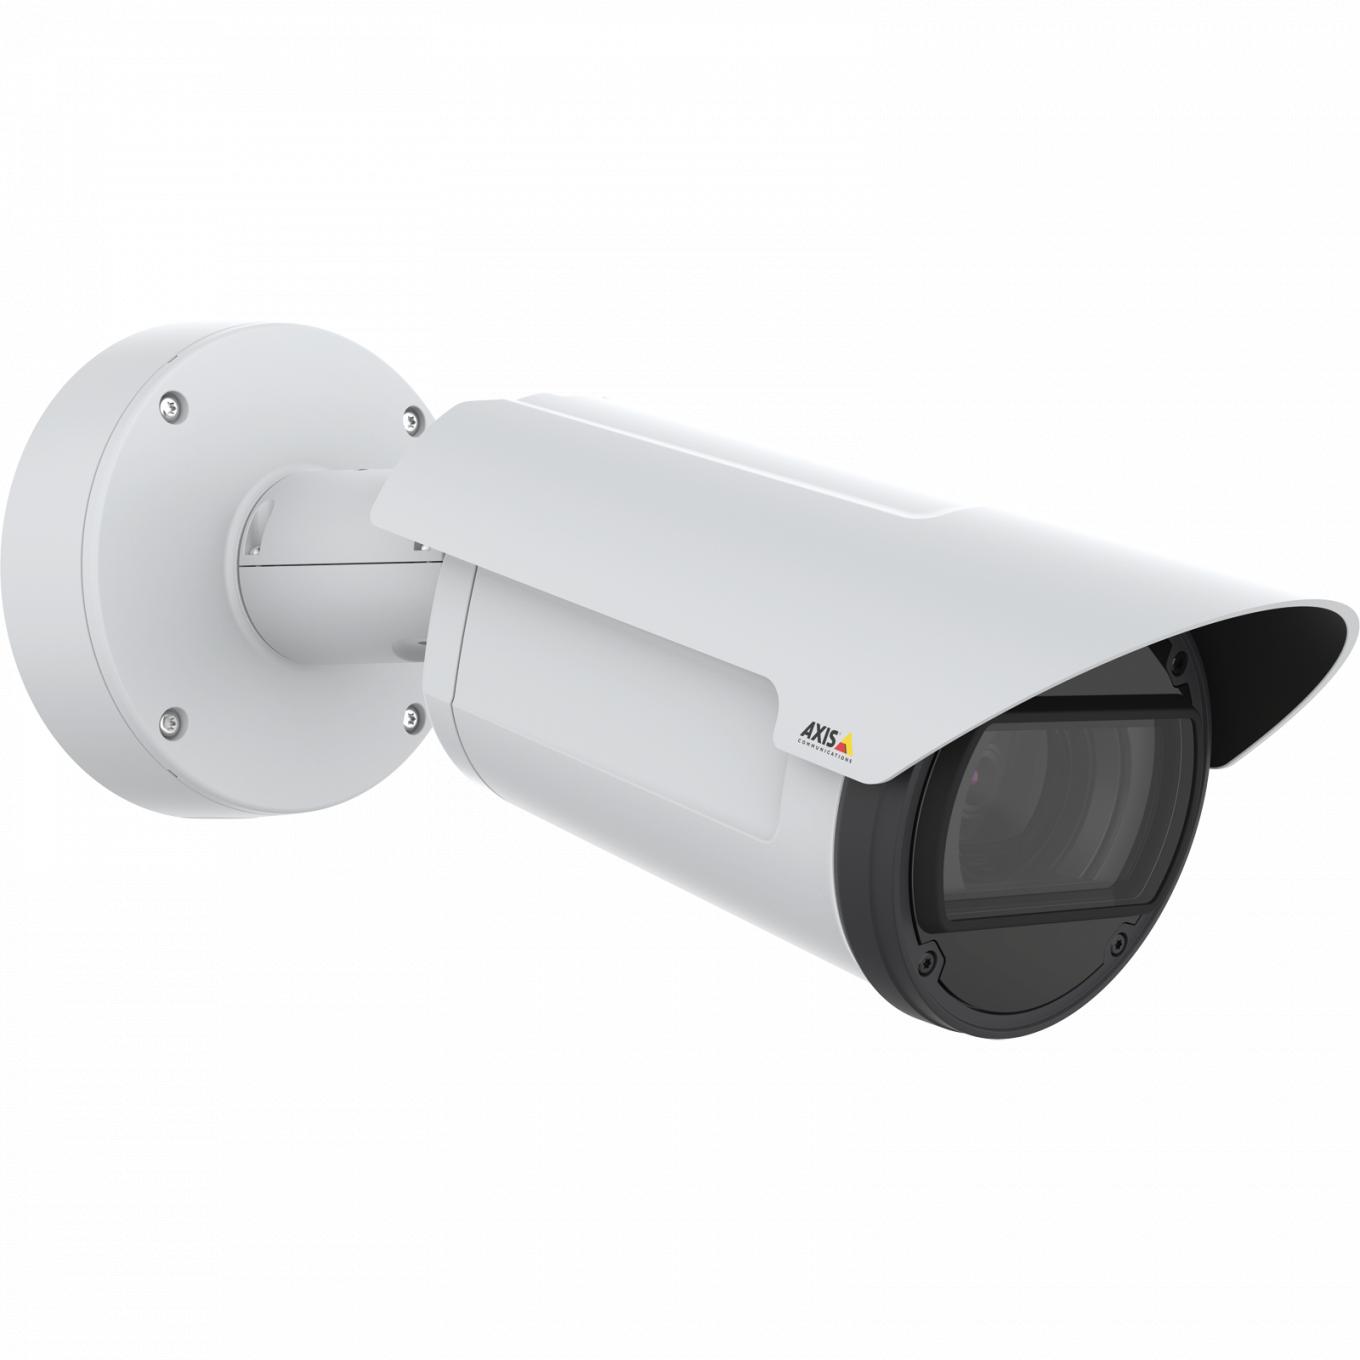 AXIS Q1786-LE IP Camera has OptimizedIR. The product is viewed from its right angle.